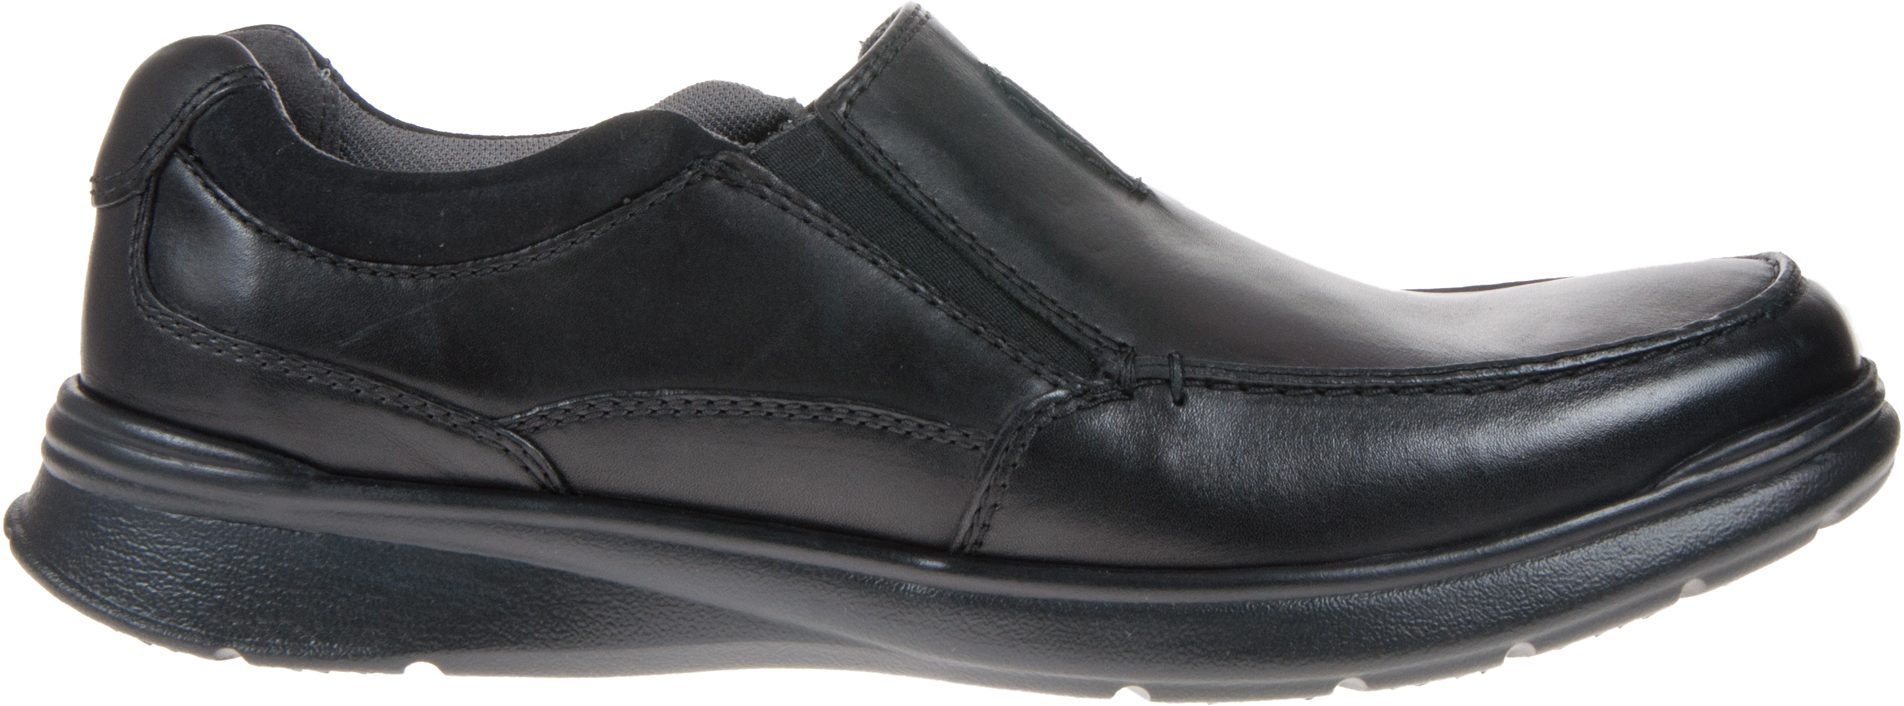 Clarks Cotrell Free Black Smooth Leather 26137386 - Casual Shoes ...